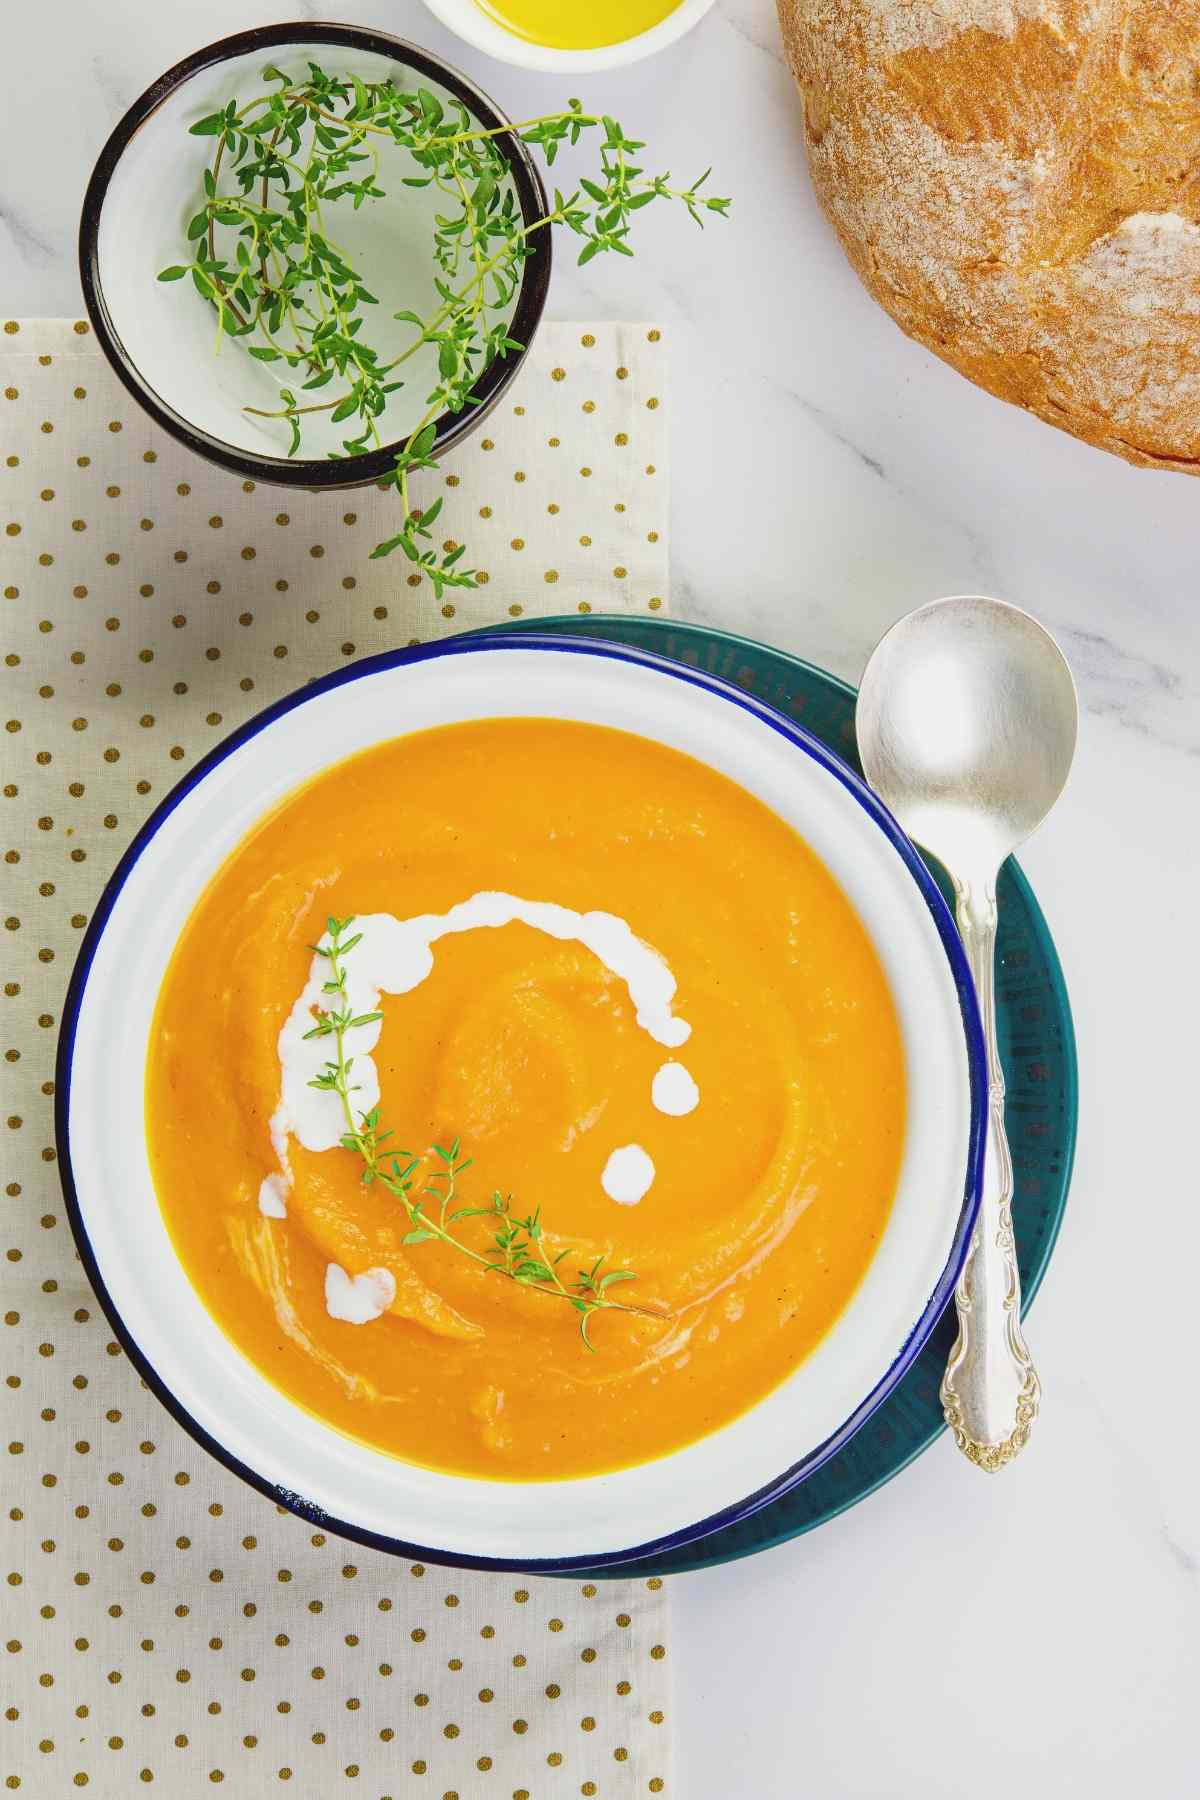 This Yellow Squash Soup is loaded with delicious flavor. It features yellow summer squash, potato, onion, garlic, canned coconut milk, and fresh thyme.